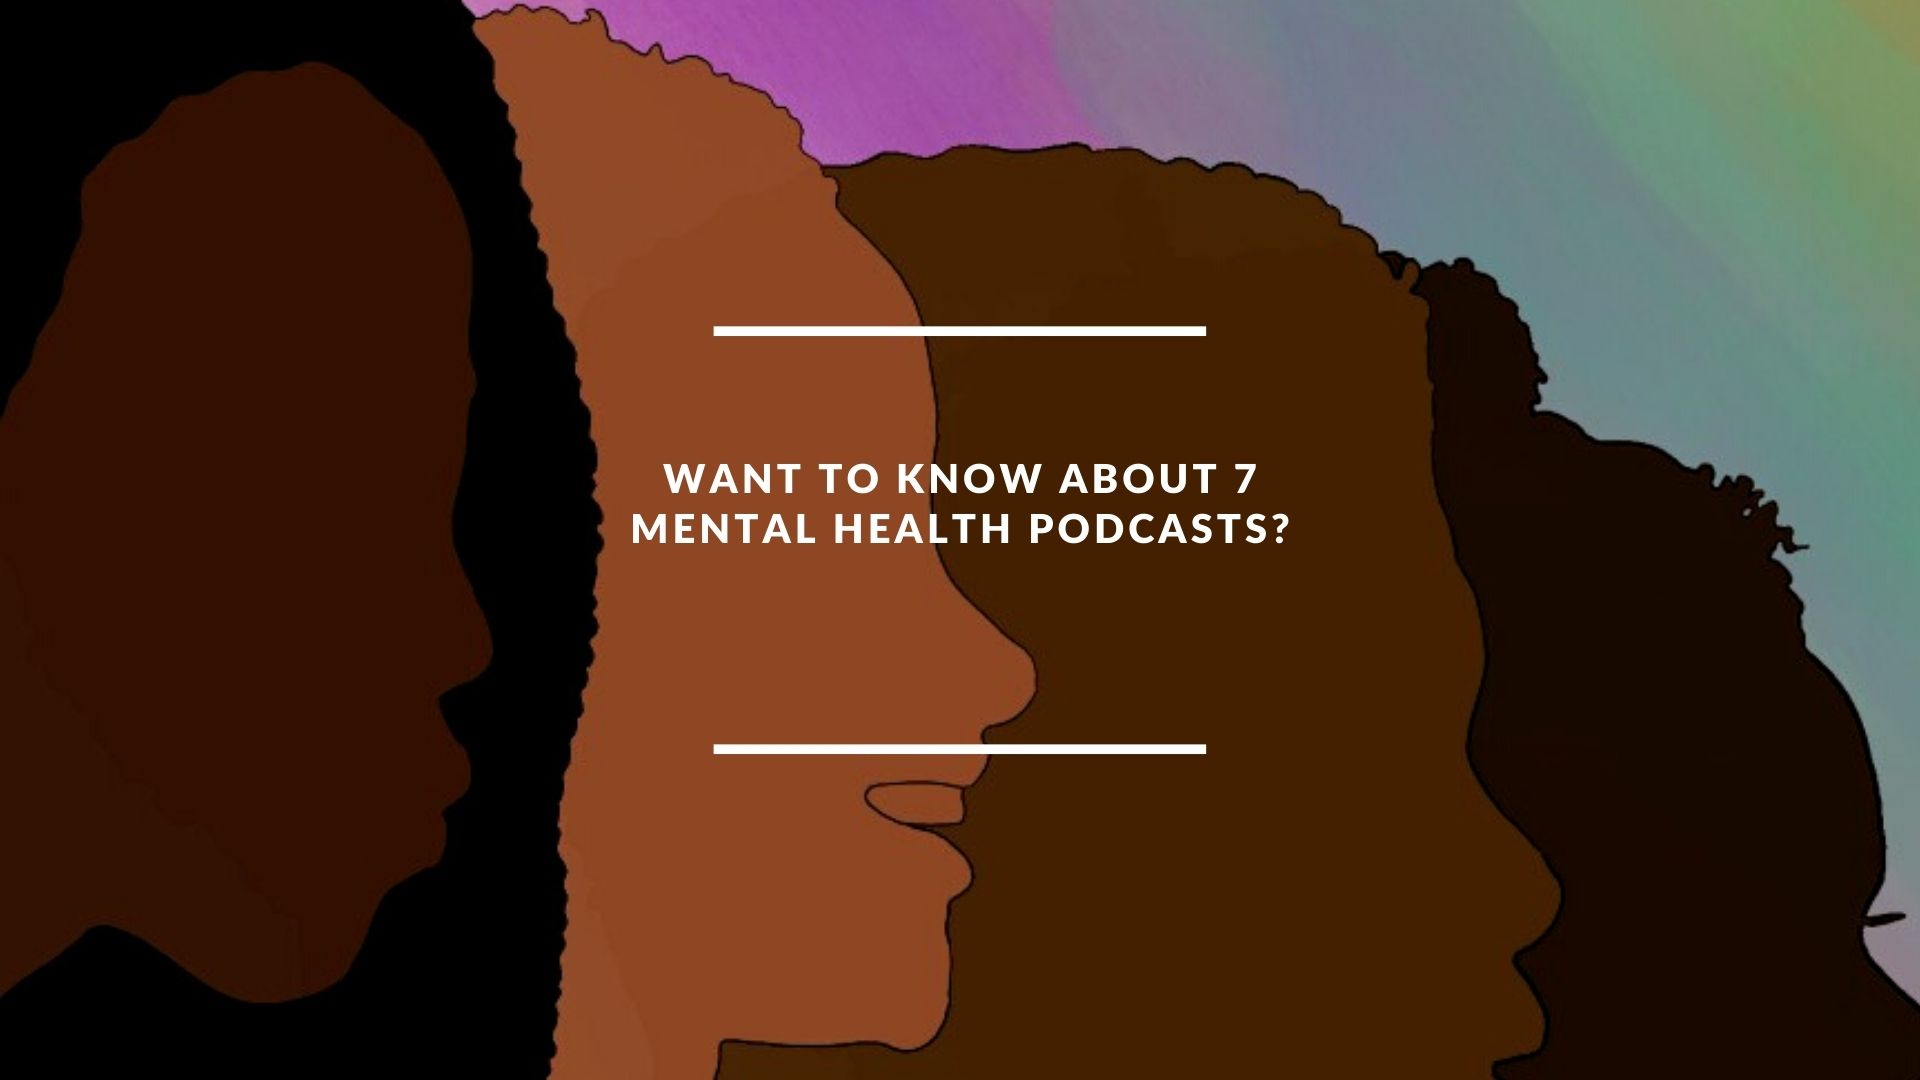 Want to know about 7 mental health podcasts?